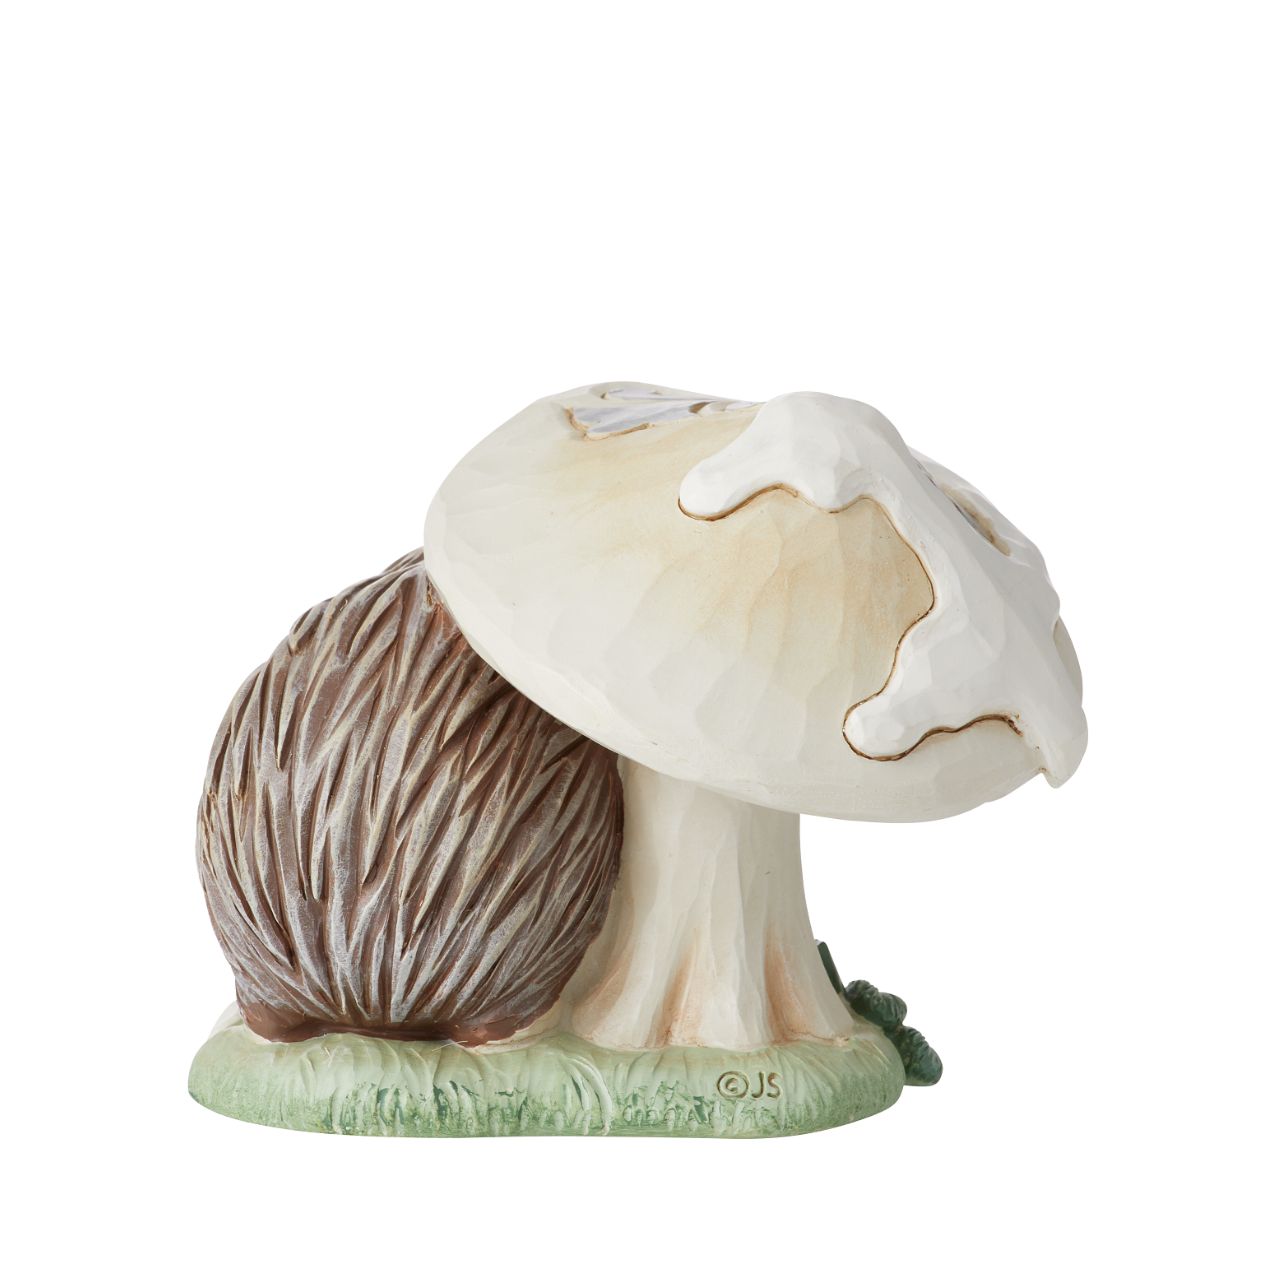 Jim Shore White Woodland Collection Hedgehog by Mushroom Mini Figurine  The White Woodland Collection showcases Intricate Jim Shore designs, with soft neutral colour palette suitable for many styles of home décor. This magical collection on Minatare Figurines is a perfect gift for anyone wanting to start a White Woodland Collection.